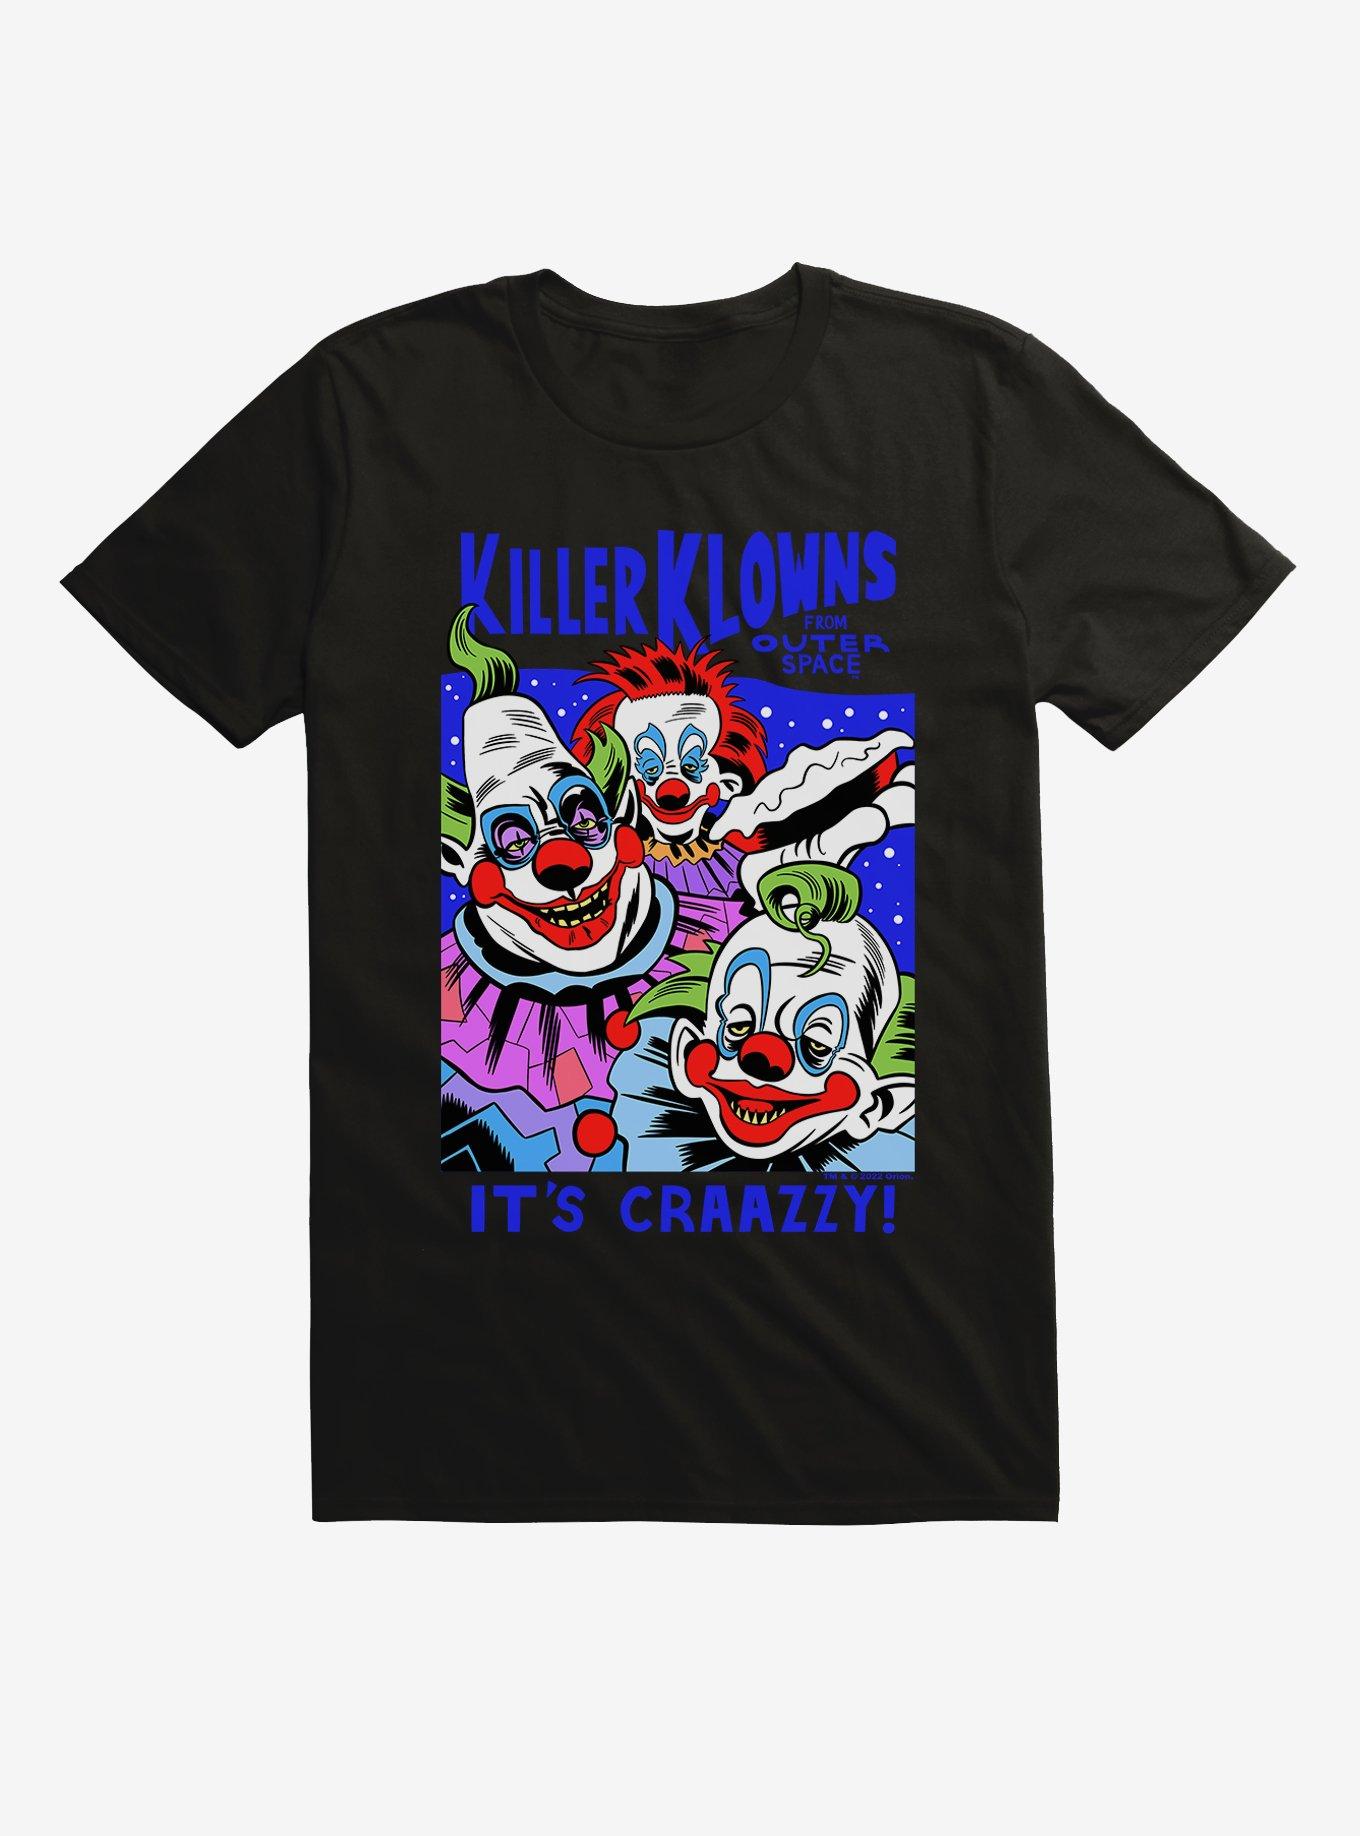 Killer Klowns From Outer Space It's Craazzy! T-Shirt, BLACK, hi-res